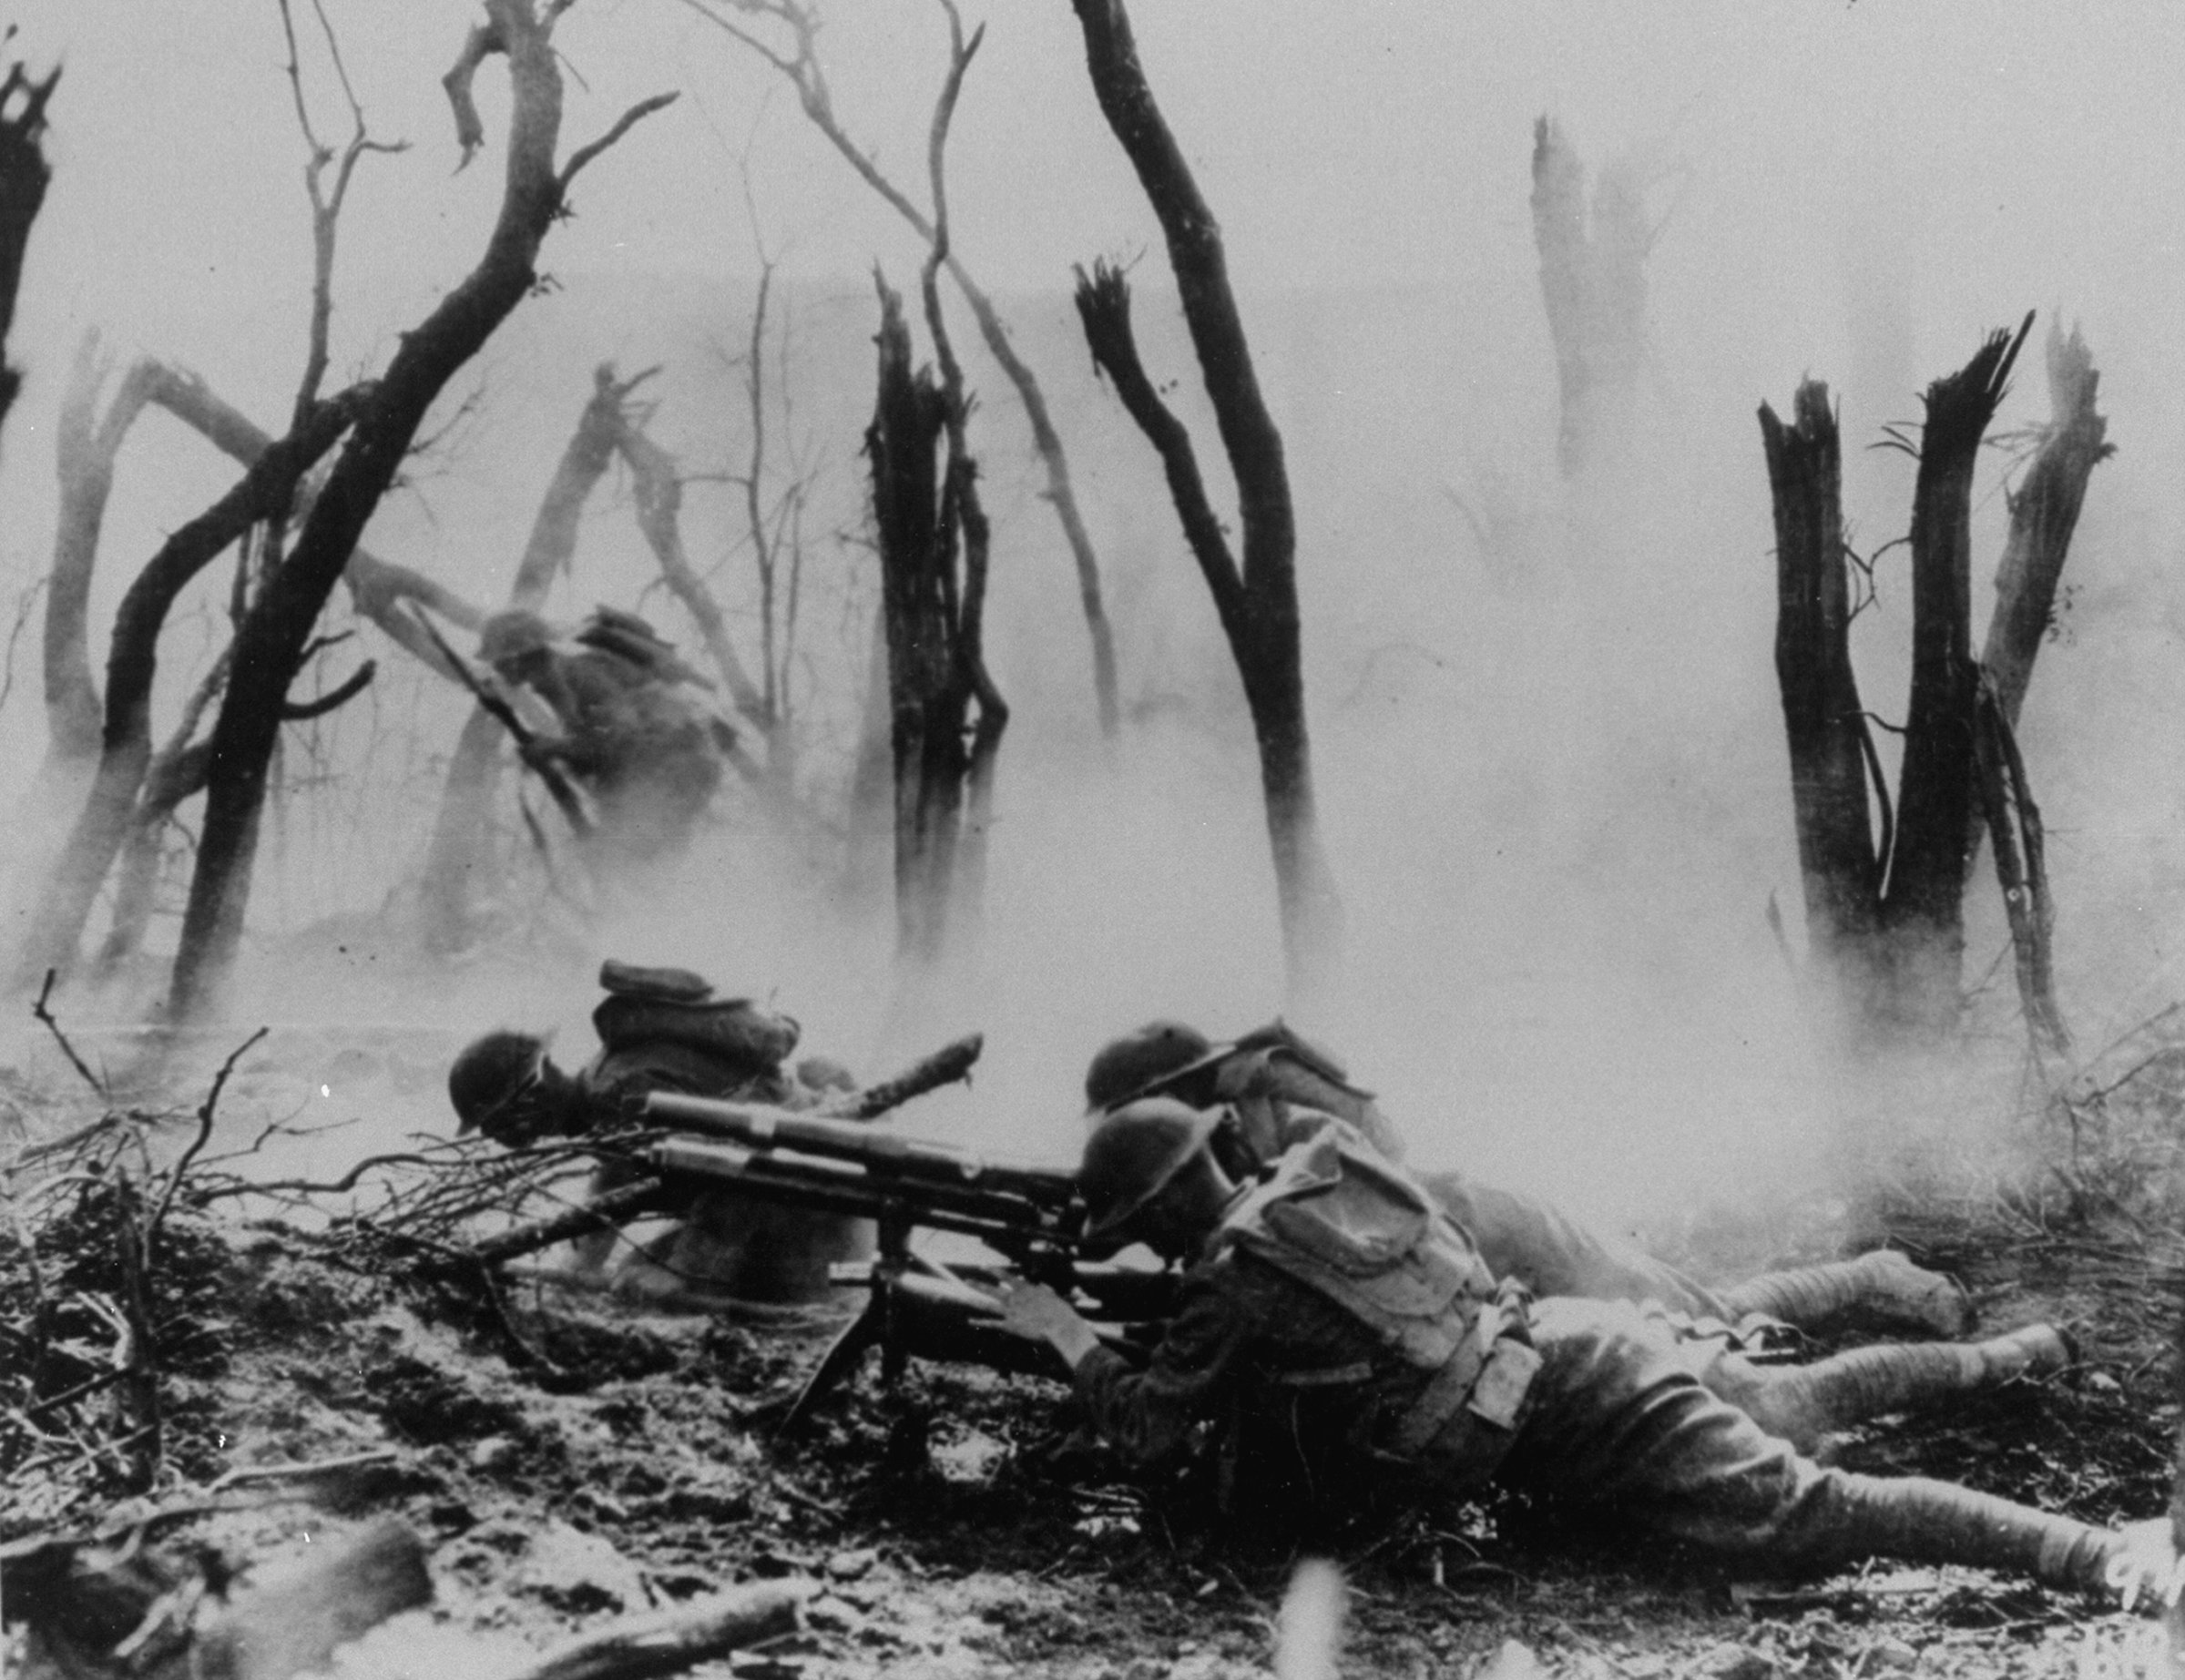 U.S. soldiers of the 23rd Infantry, 2nd Division, firing a 37mm machine gun at a German position in the Argonne Forest, during the Meuse-Argonne offensive in 1918.